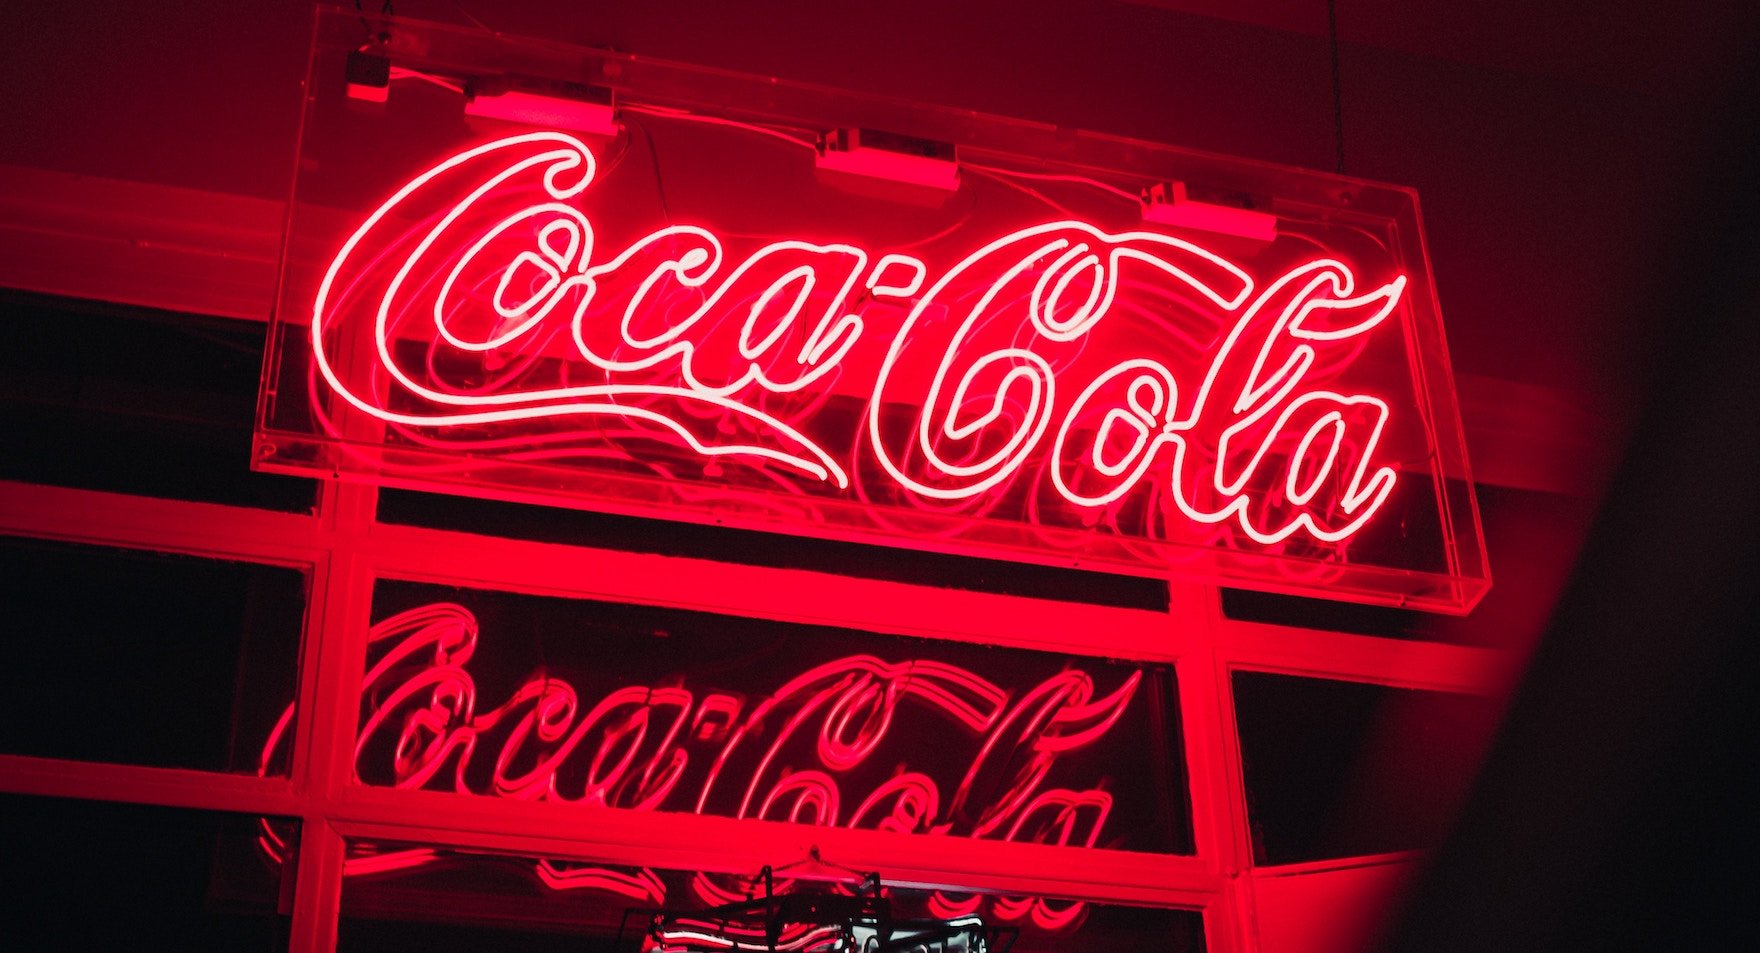 Multi-channel targeting, using Coca Cola's audience